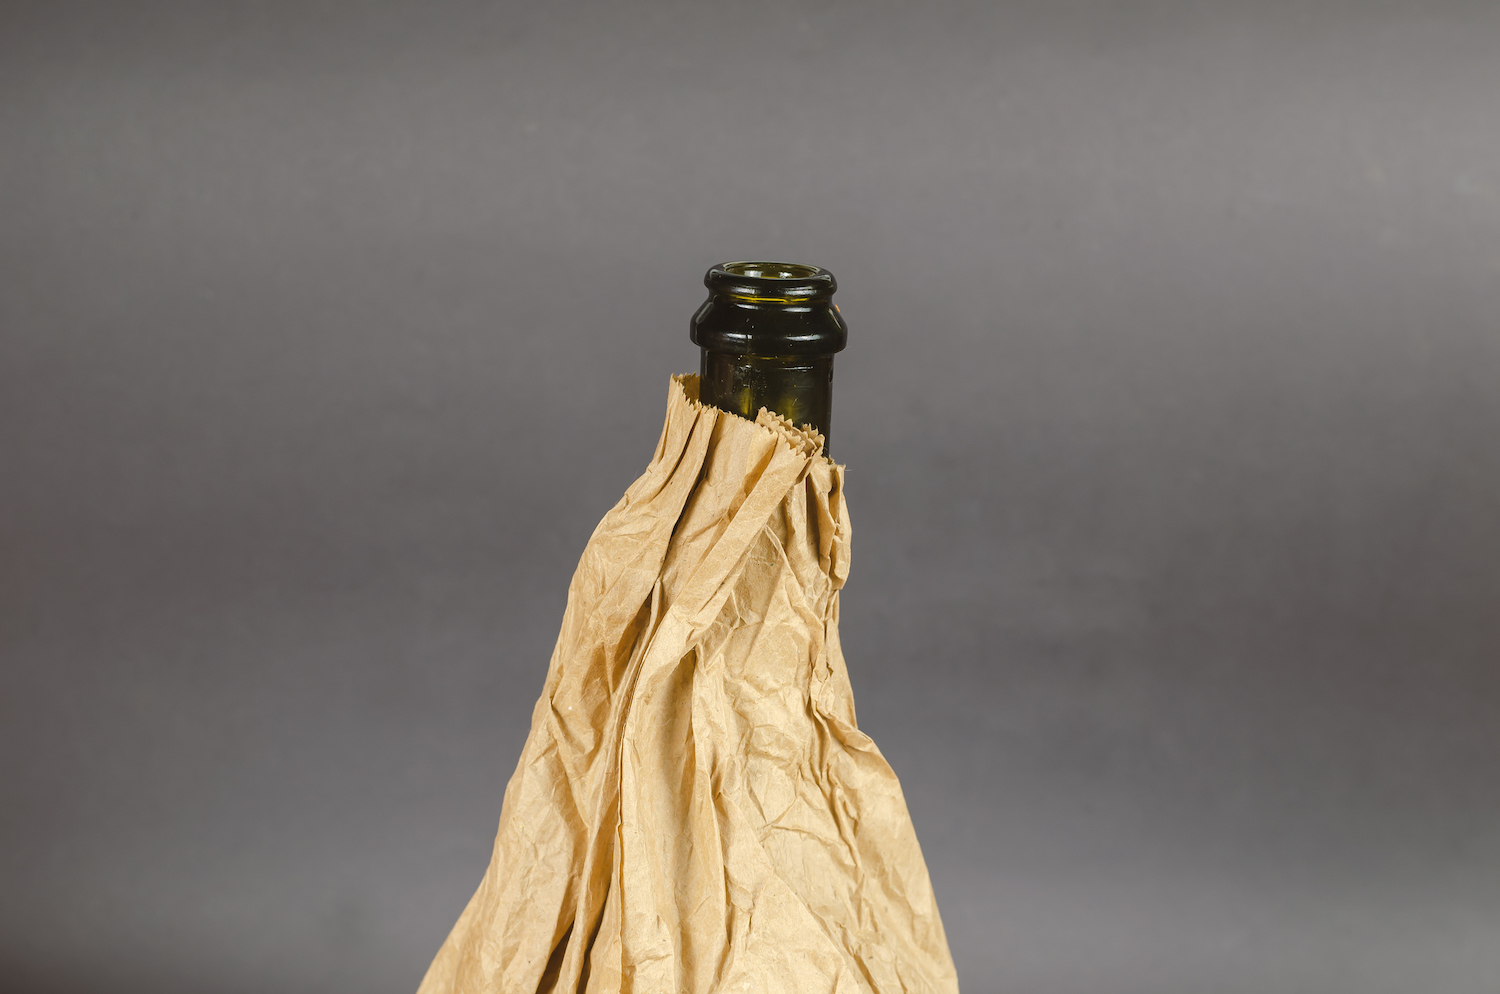 Bottle in a paper bag on a gray background. Dark bottle of alcohol in a crumpled brown bag. Close-up. Selective focus.